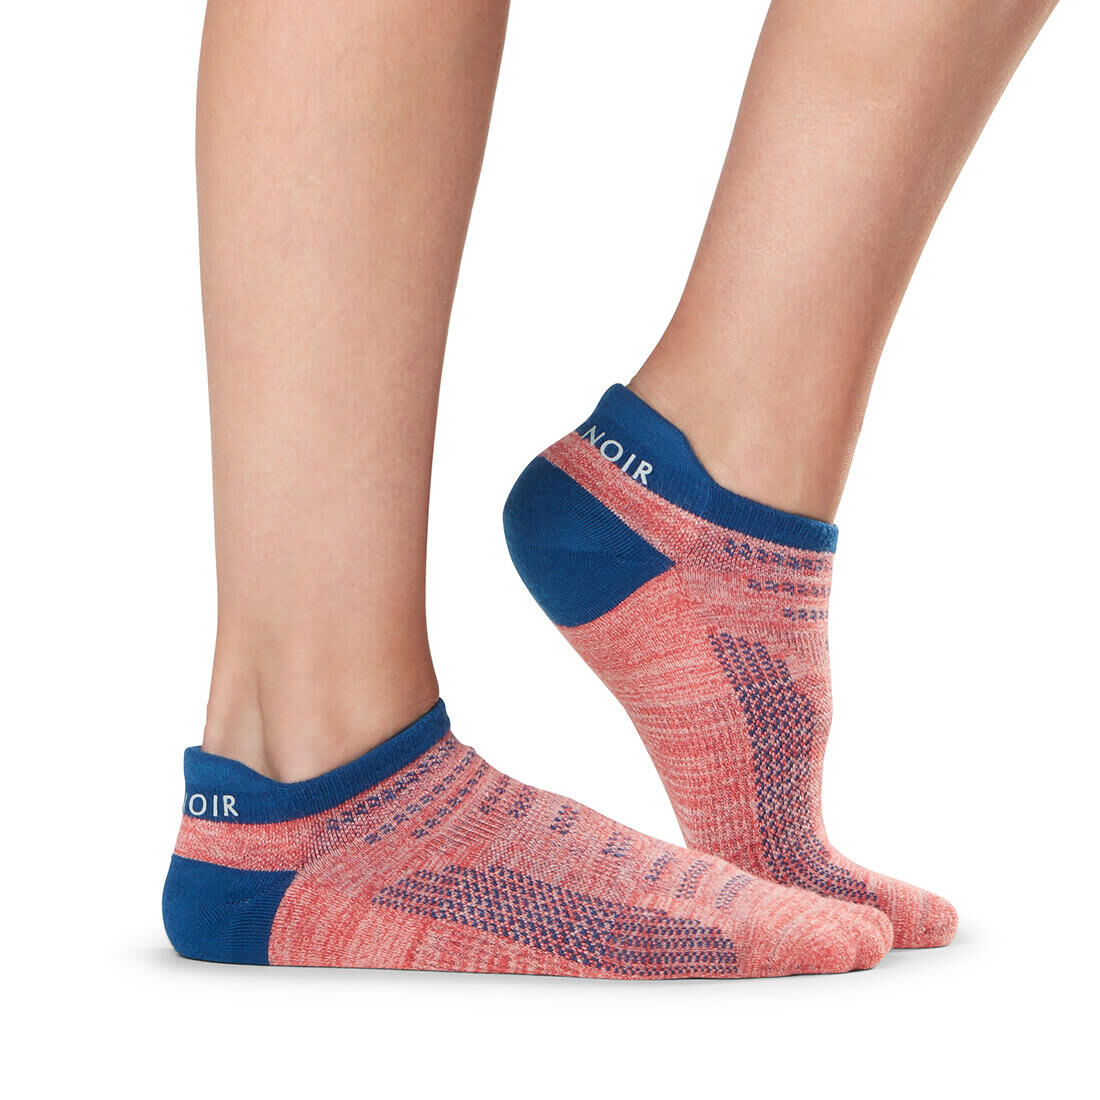 FITNESS-MAD Womens/Ladies Two Tone Sports Socks (Coral/Blue)